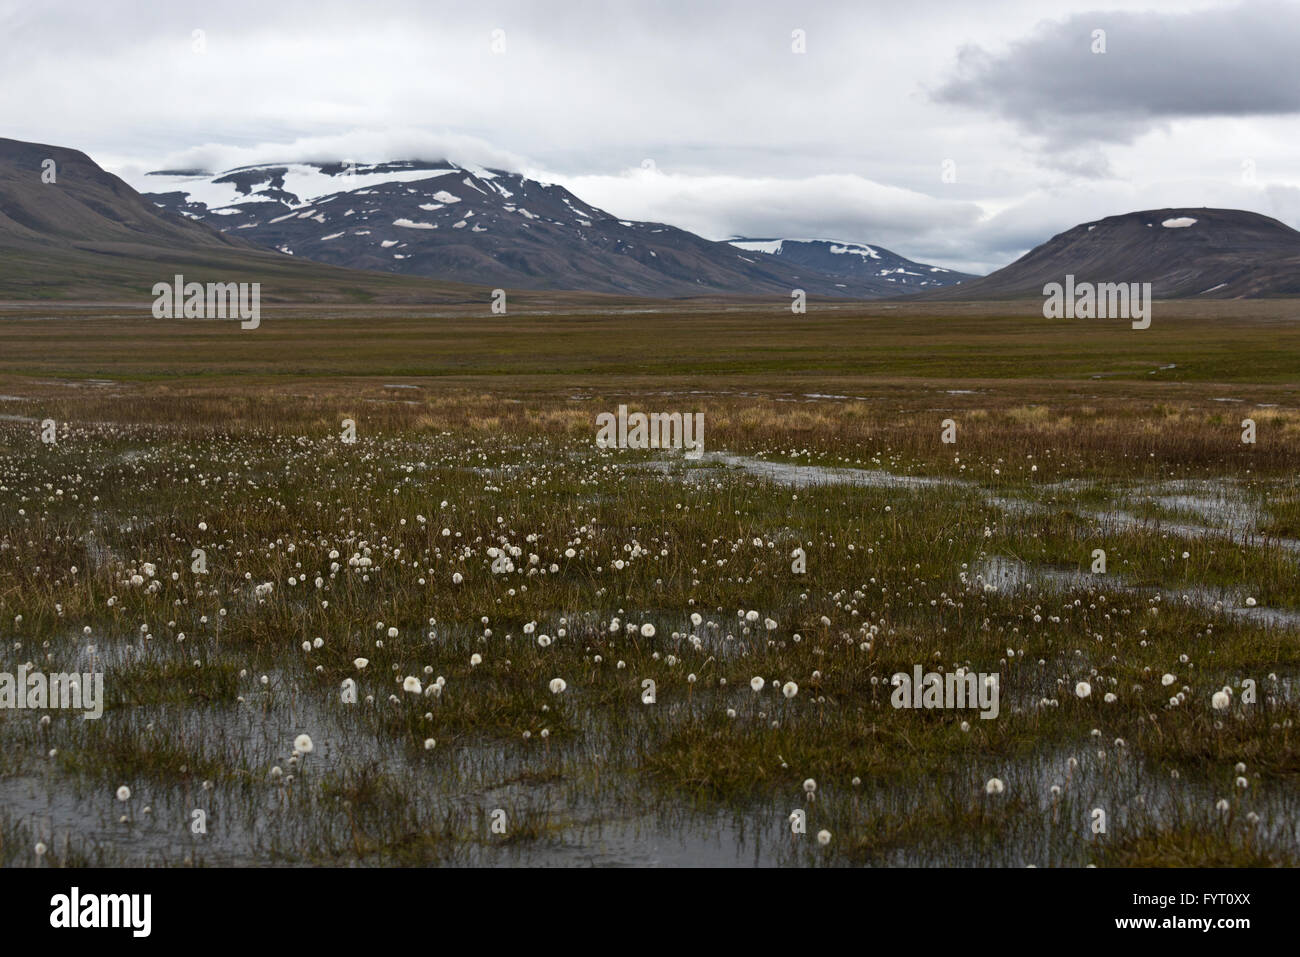 The view along Advent Valley with cotton grass in the foreground. Stock Photo